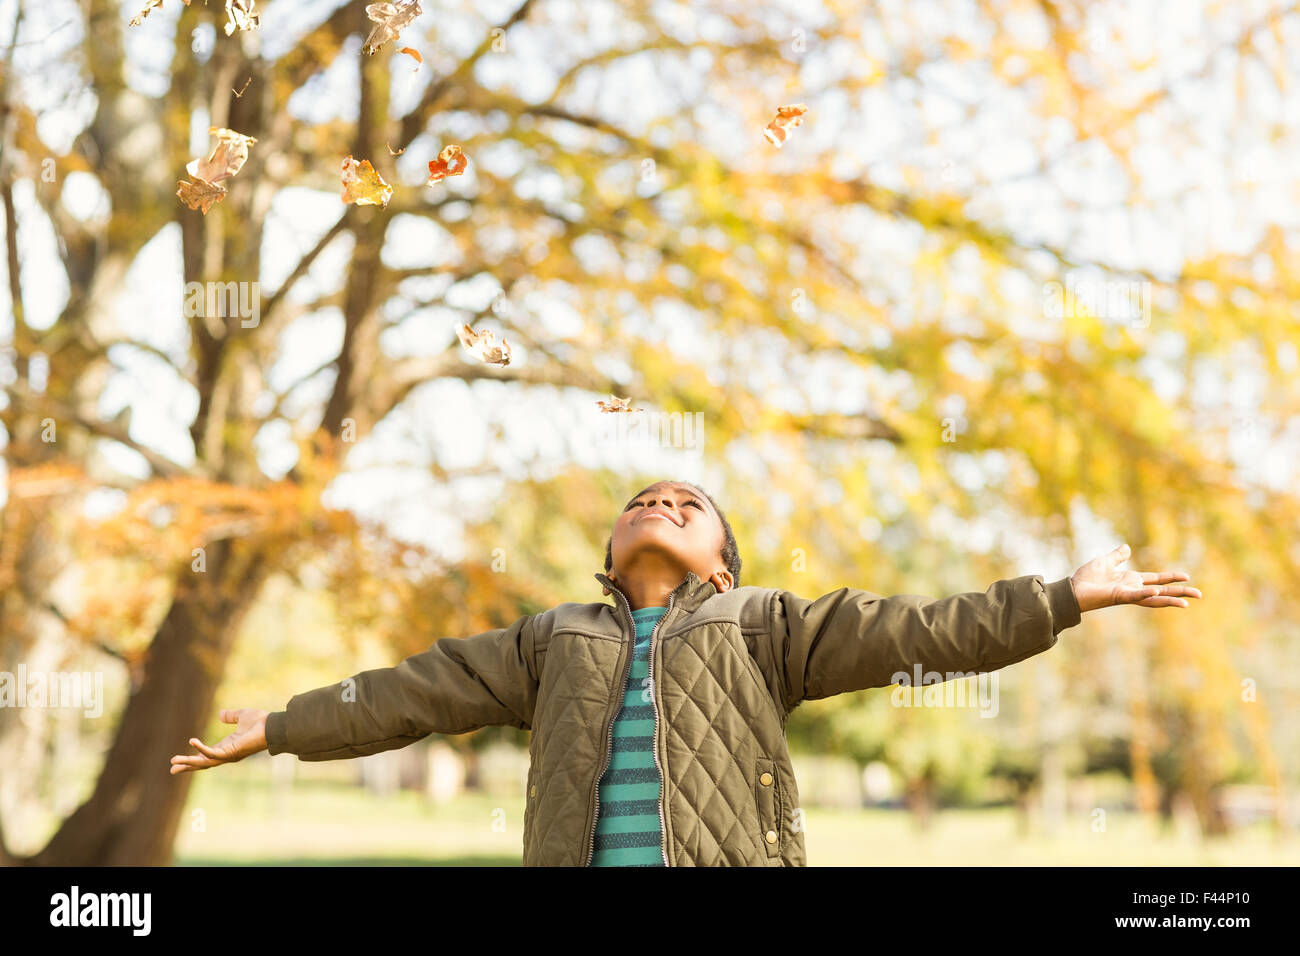 leaves drop onto a little boy with outstretched arms Stock Photo